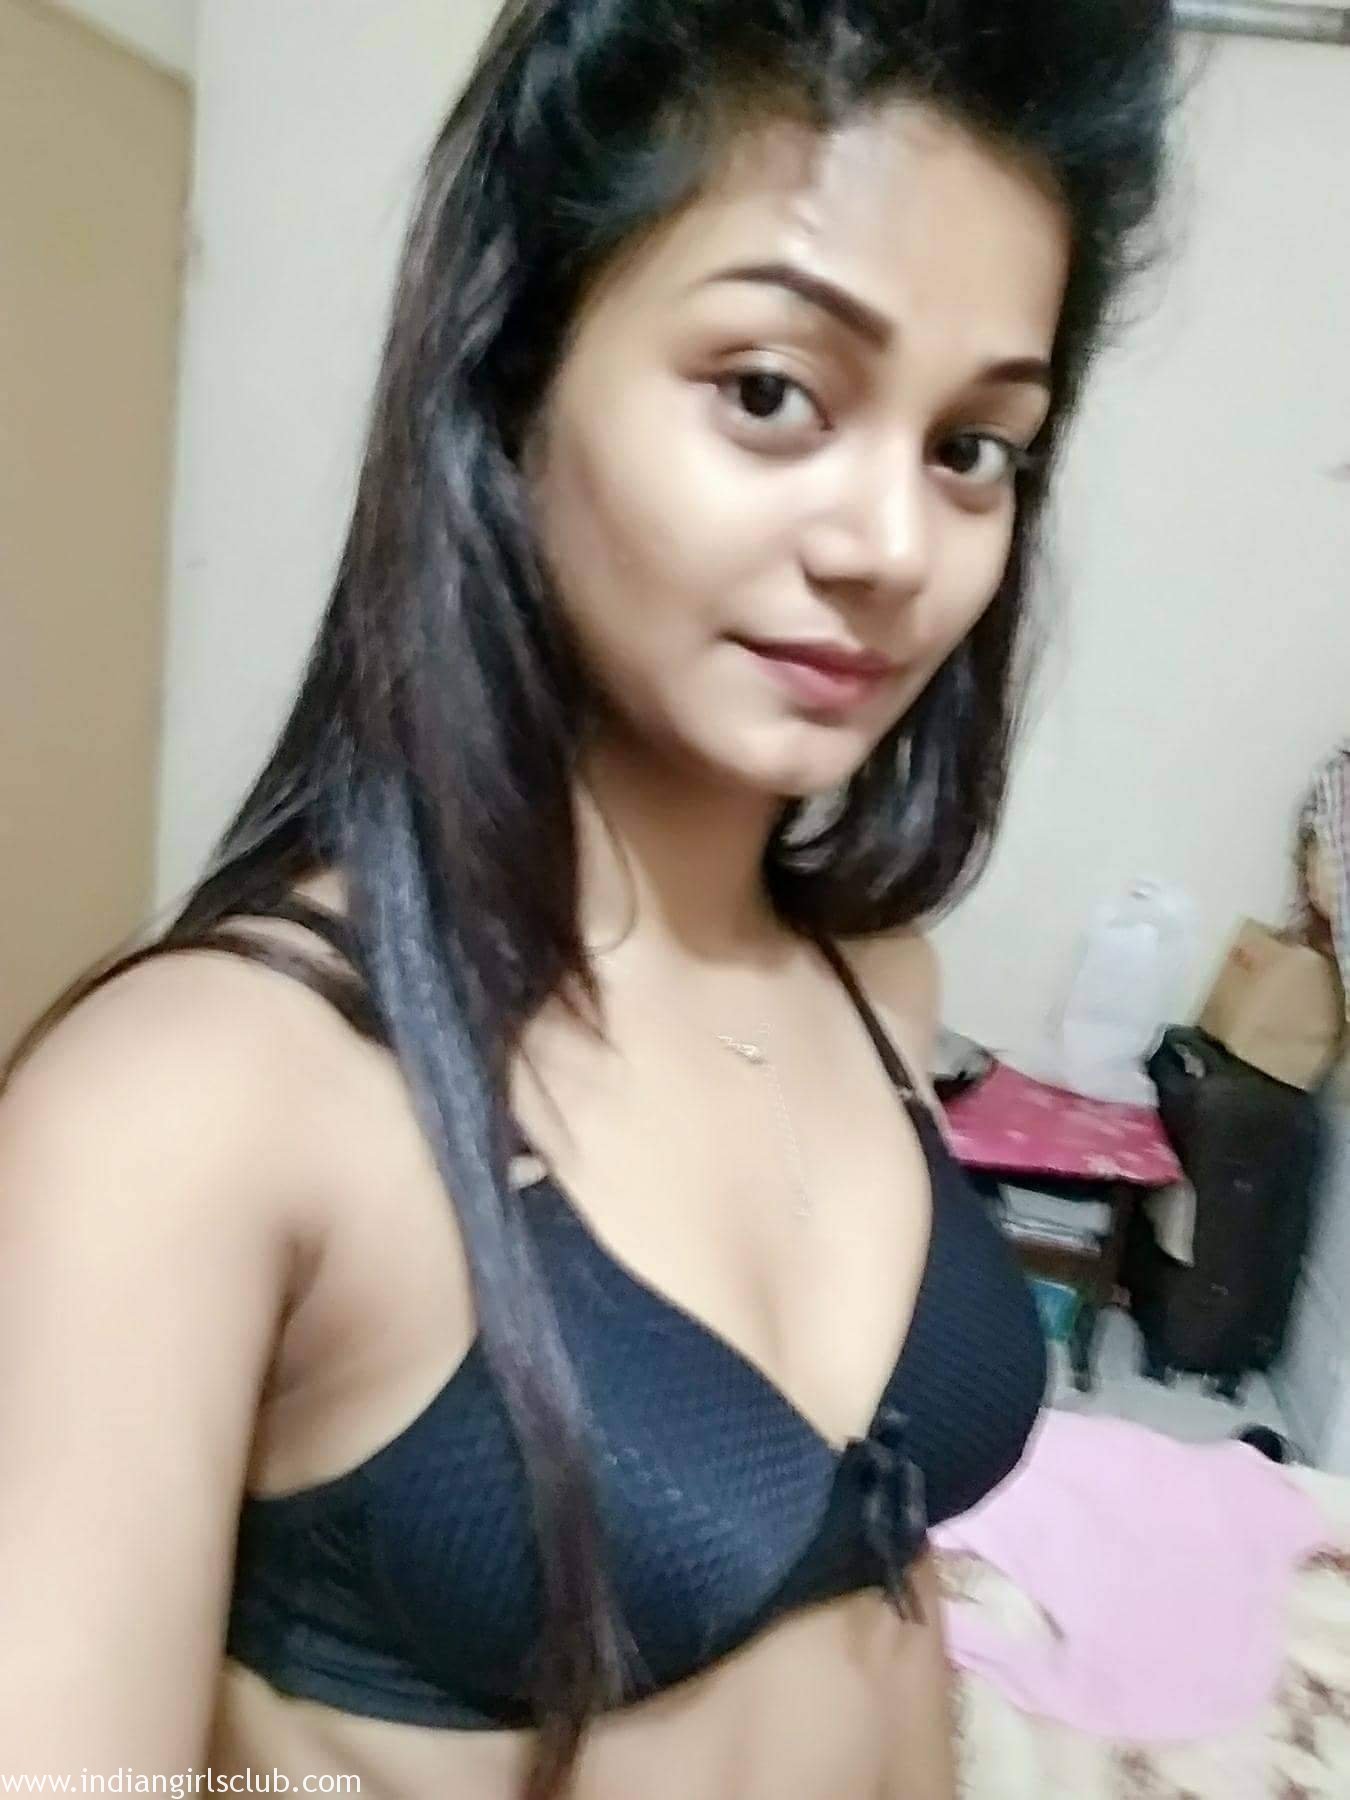 juicy_indian_teen_homemade_porn_4 - Indian Girls Club image pic picture